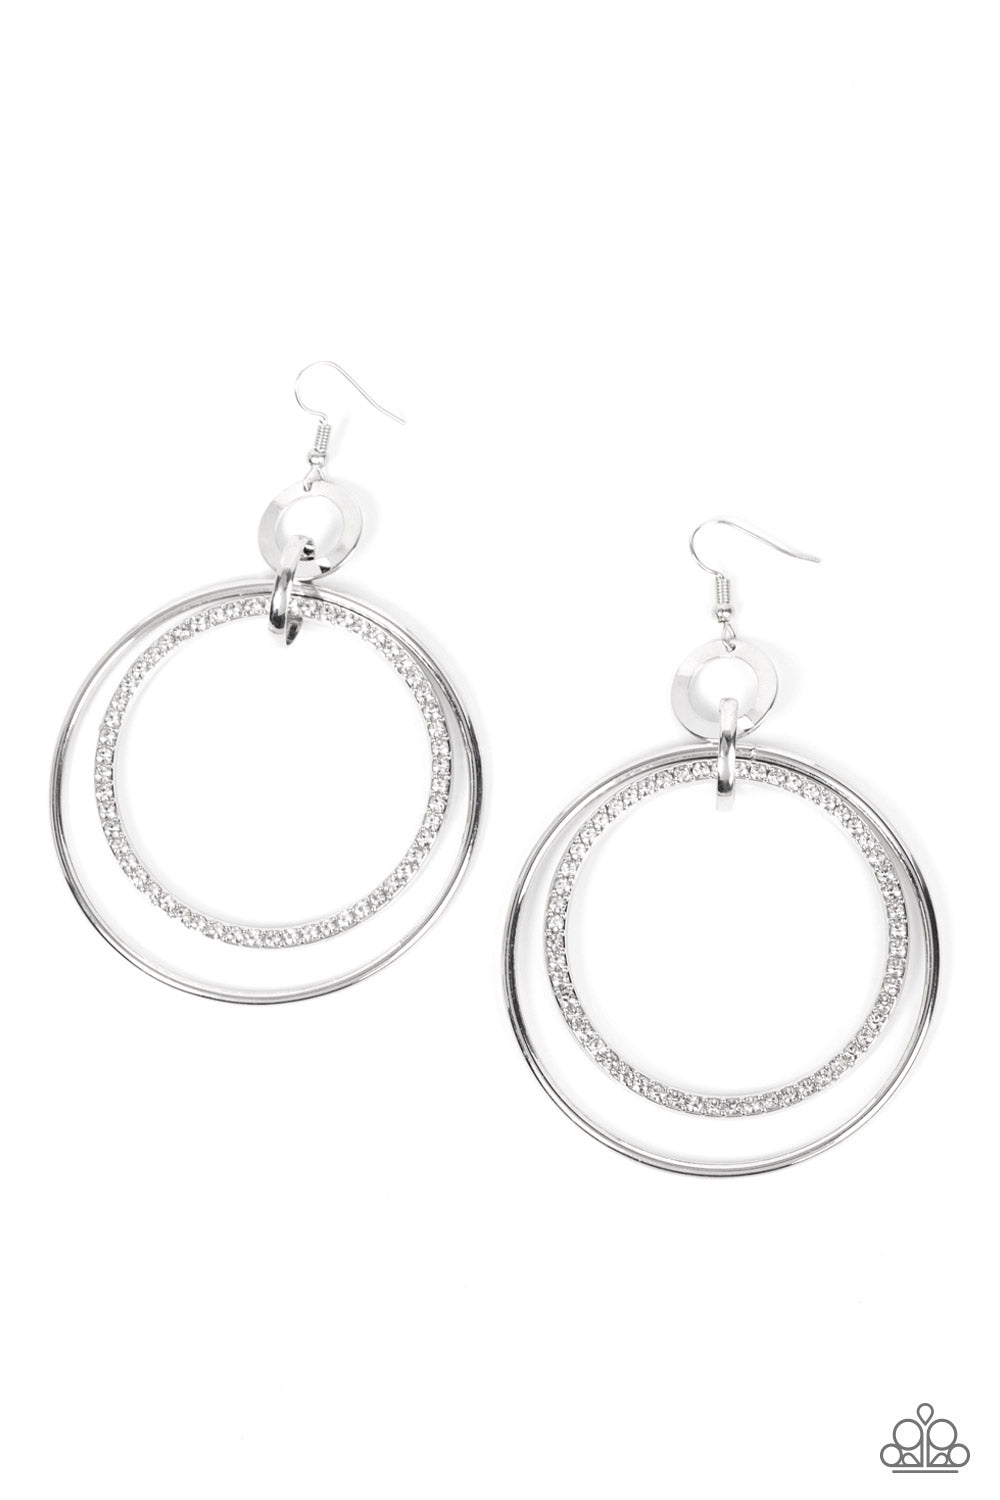 Haute Hysteria Silver Earrings - Paparazzi Accessories Bejeweled Accessories By Kristie - Trendy fashion jewelry for everyone -